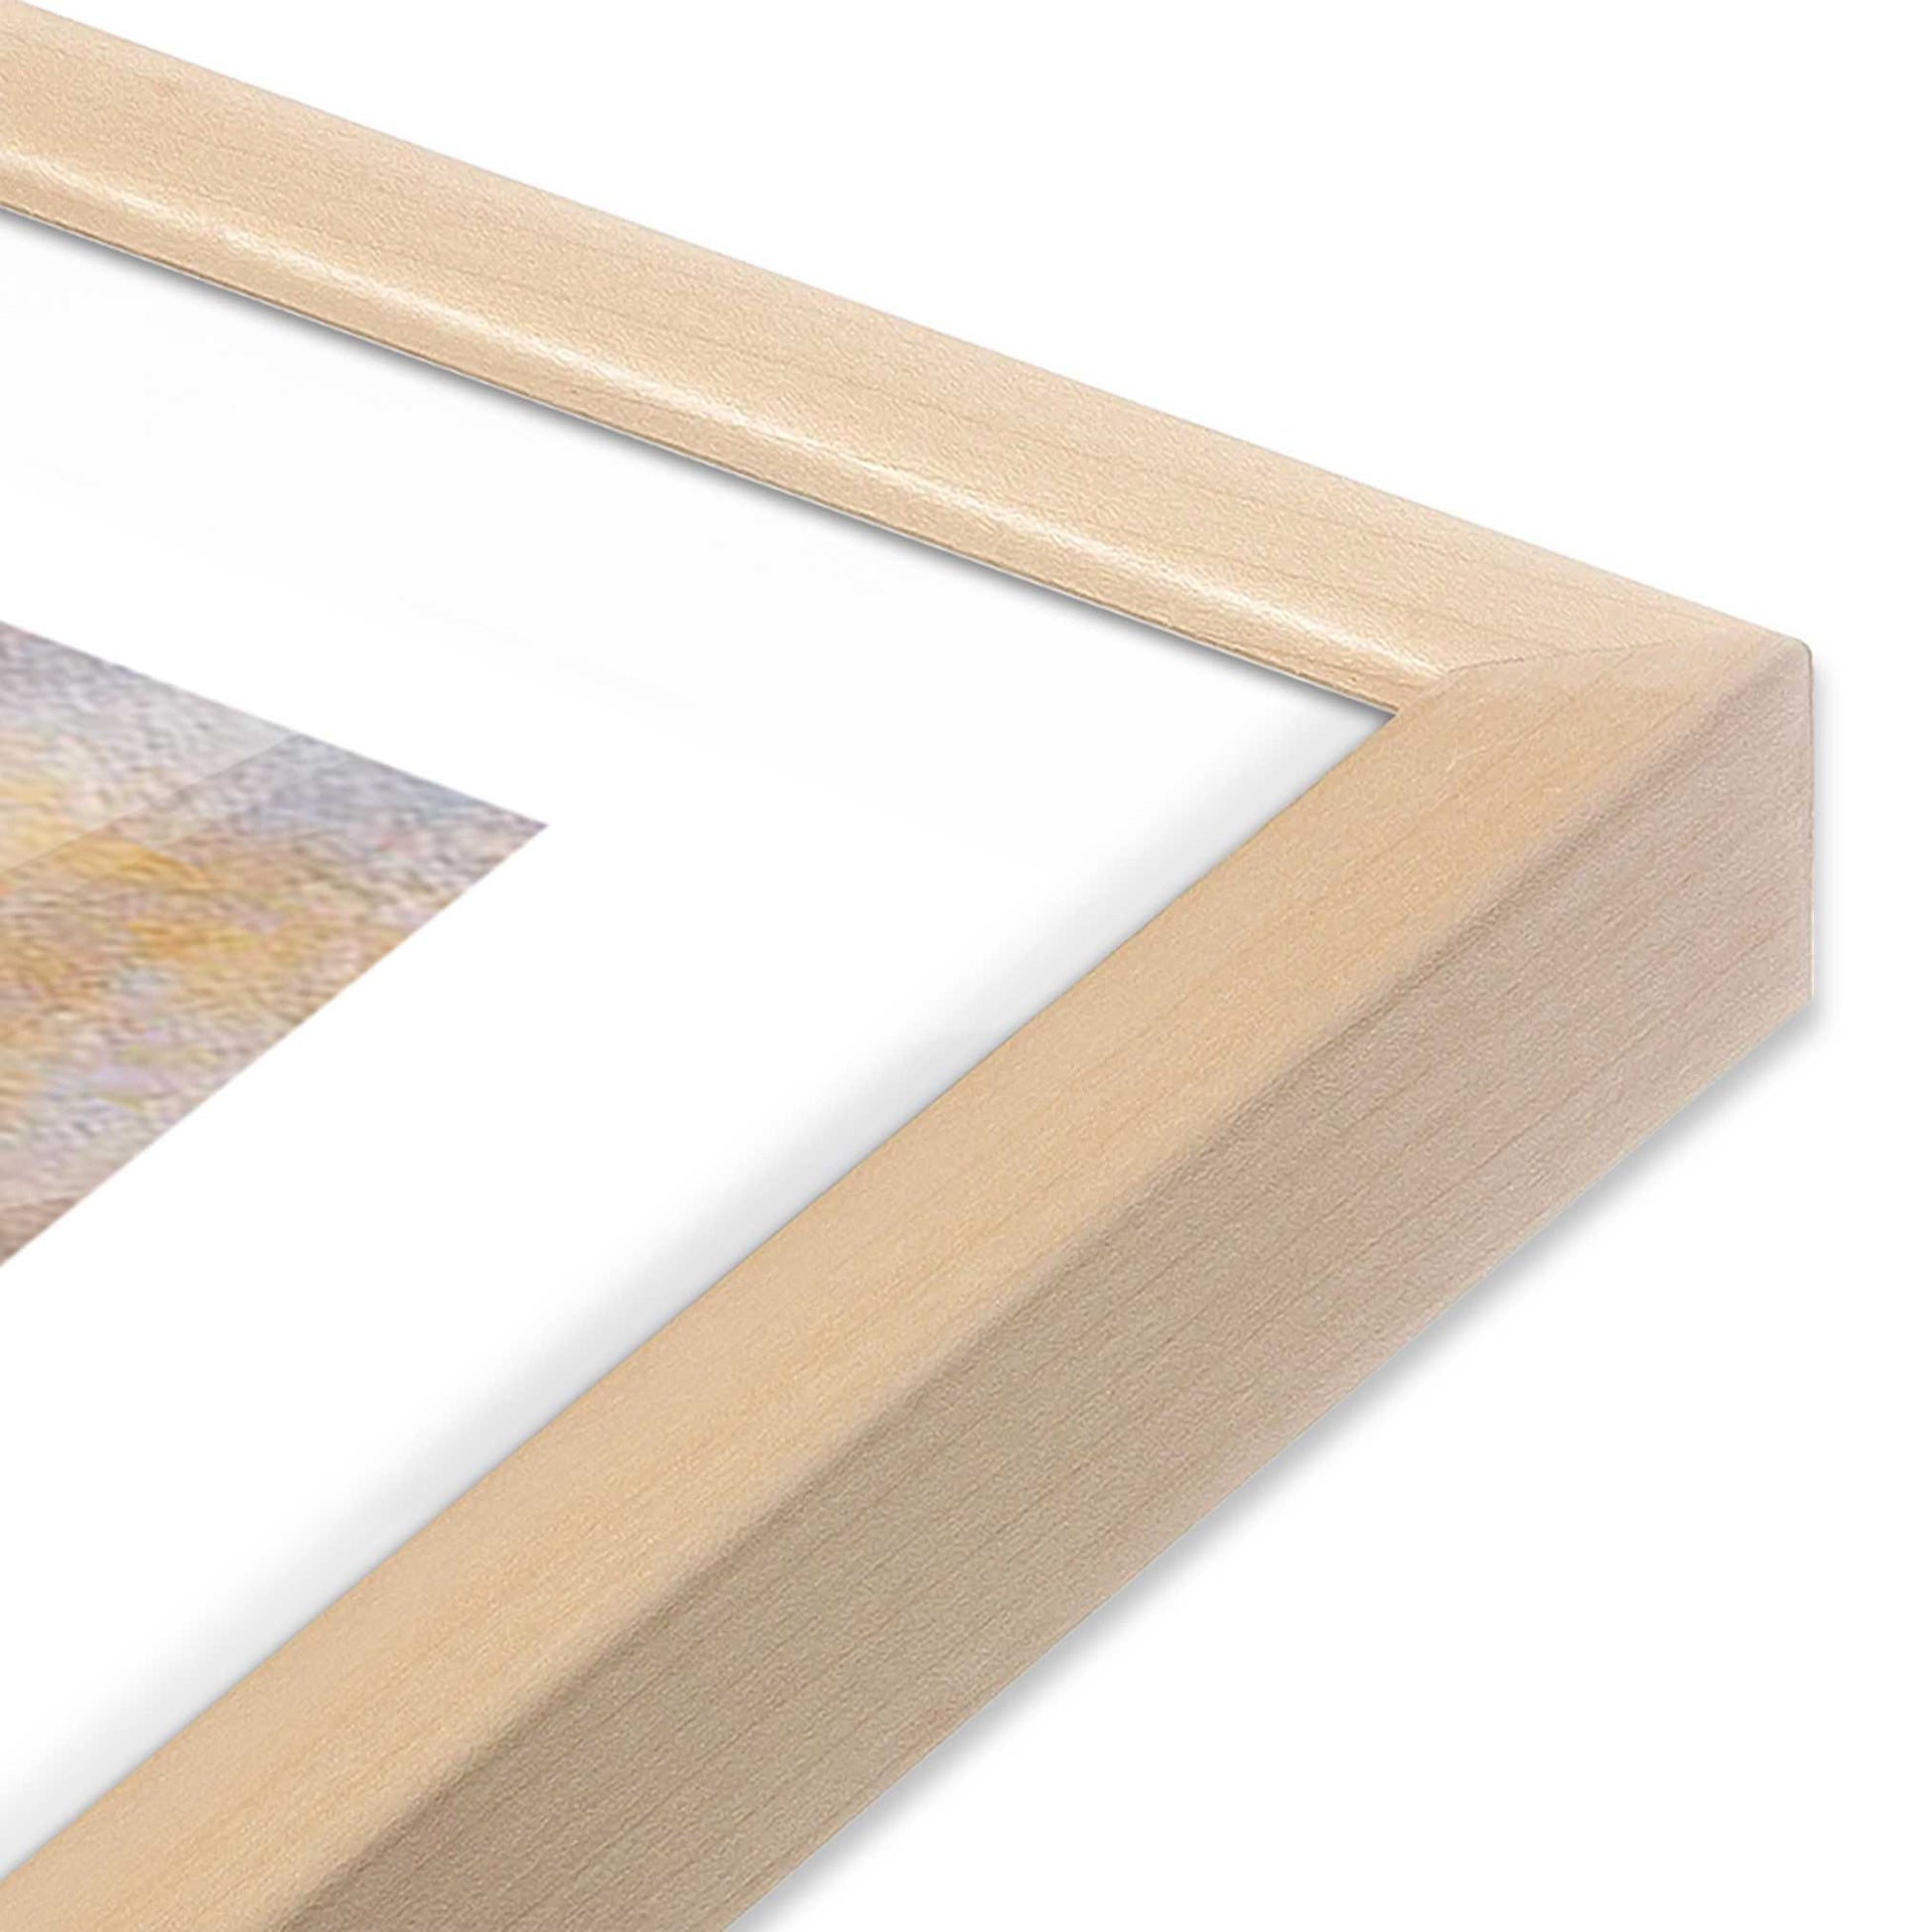 [Color:Raw Maple], Picture of the corner of the art